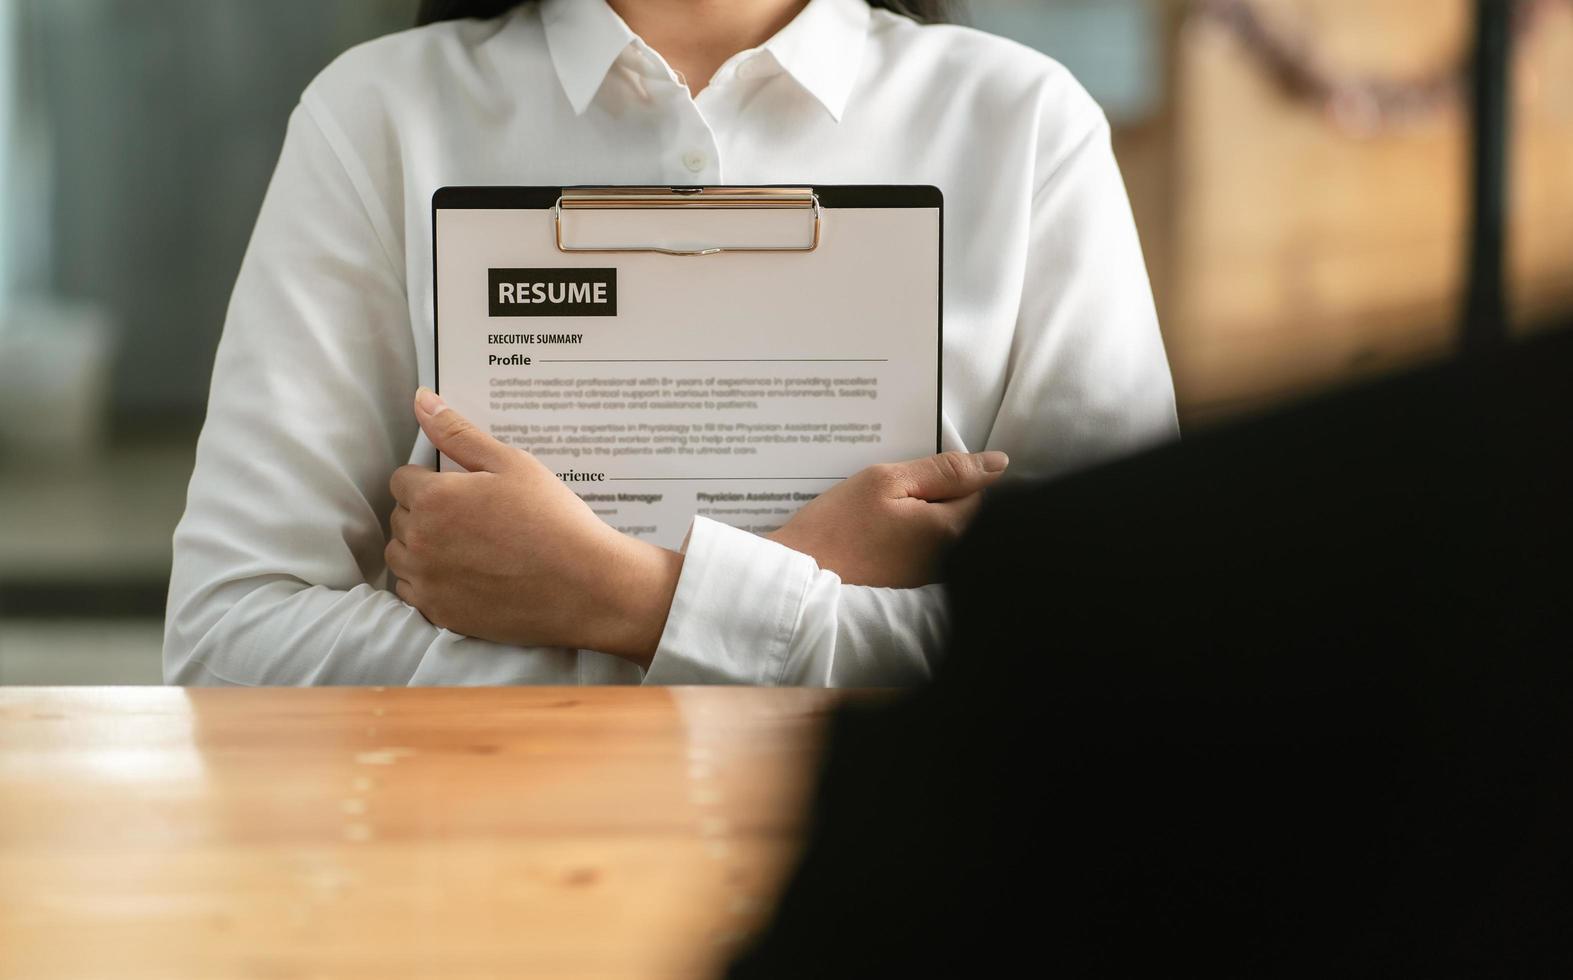 Business find new job, interview the job and hiring. Job applicant holding resume.Open handshake and resume job interview or acceptance. photo